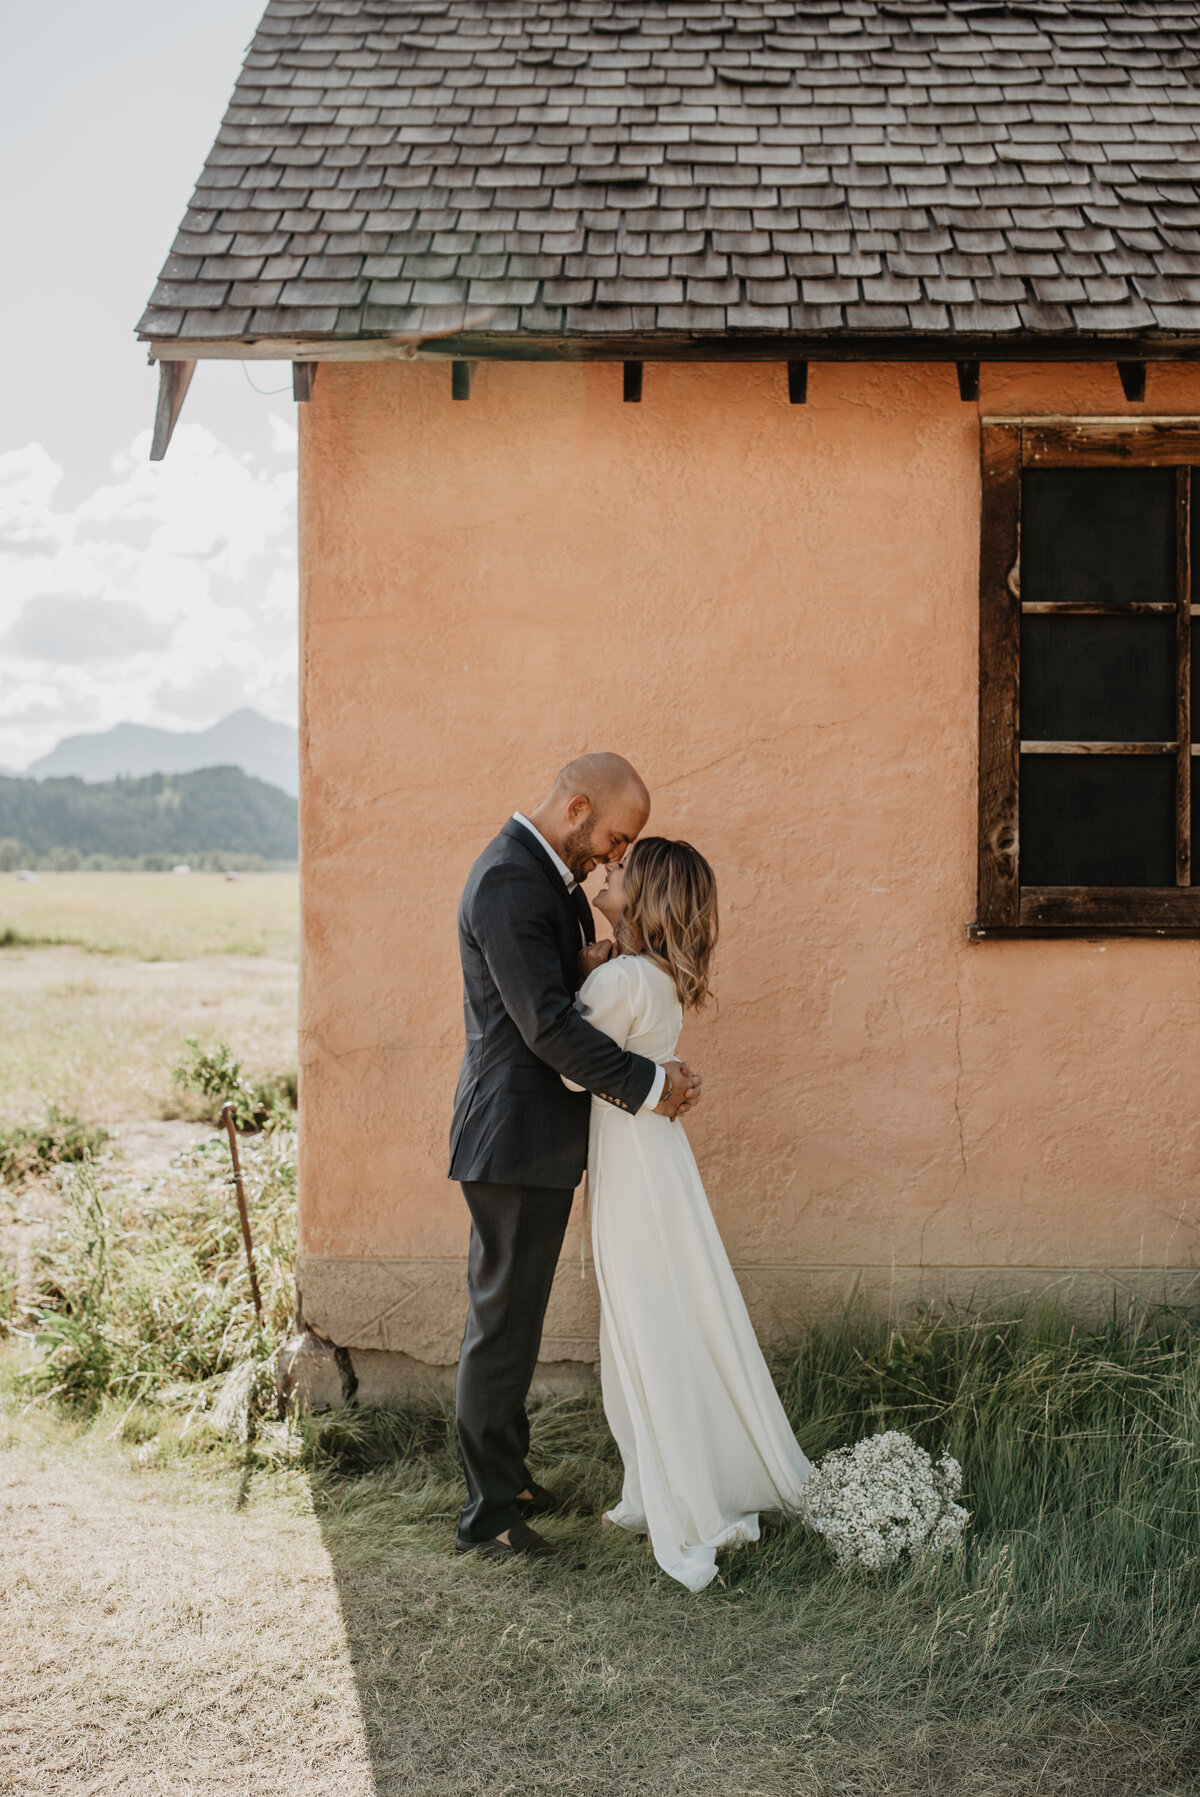 wedding day bridals with bride and groom standing in front of an old rustic house with the groom kissing the bride's forehead and holding her waist